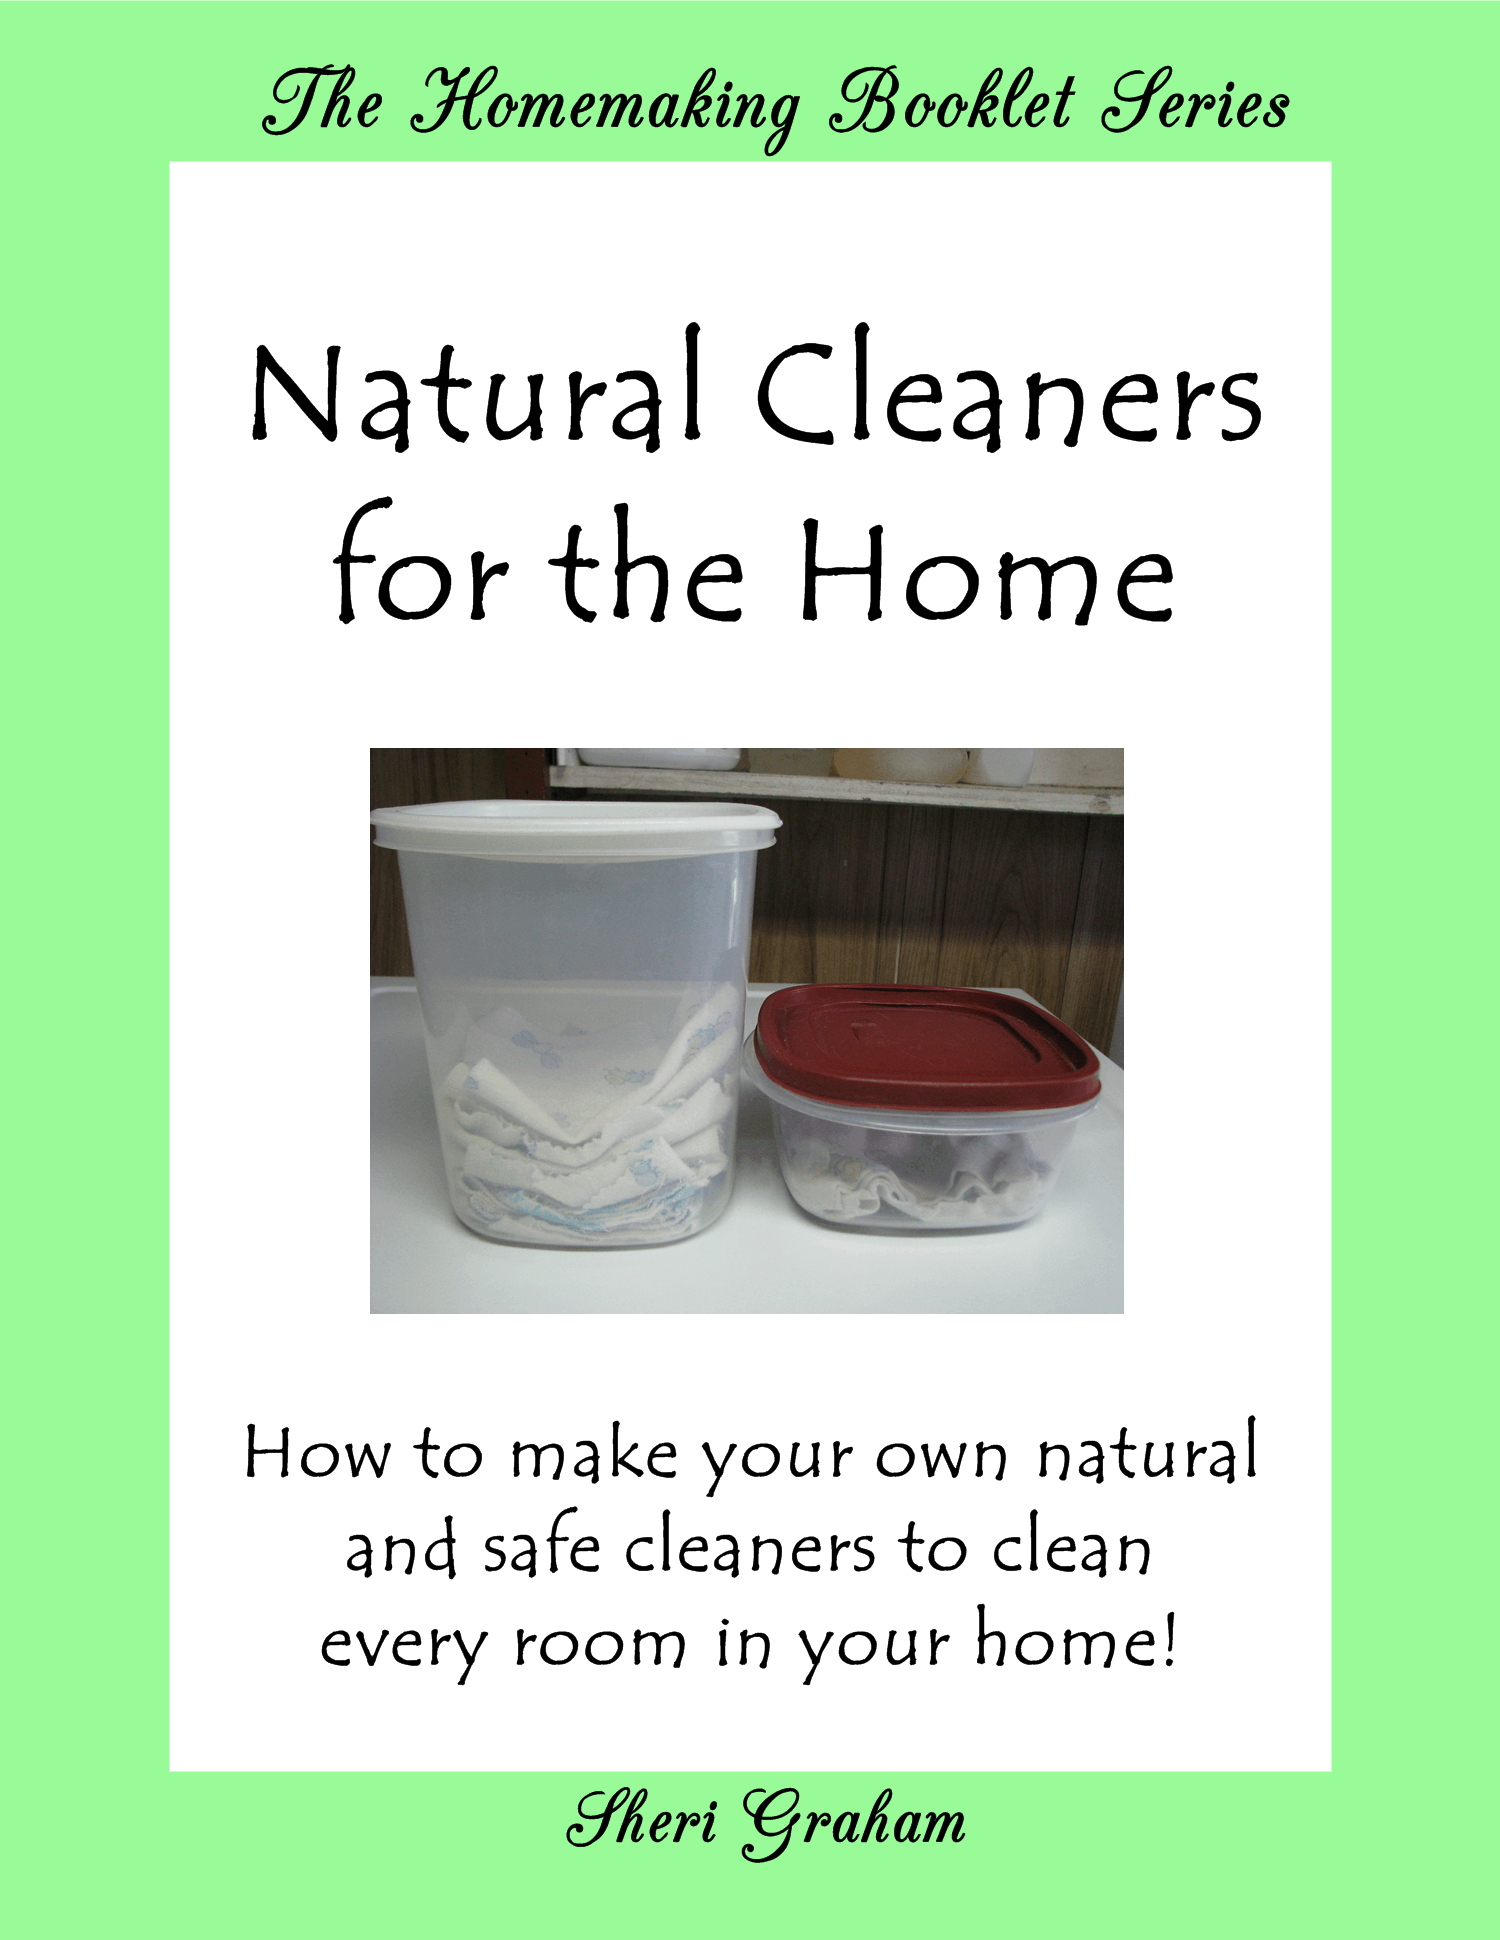 2 New Books on Kindle: Homemade Yogurt the Easy Way & Natural Cleaners for the Home